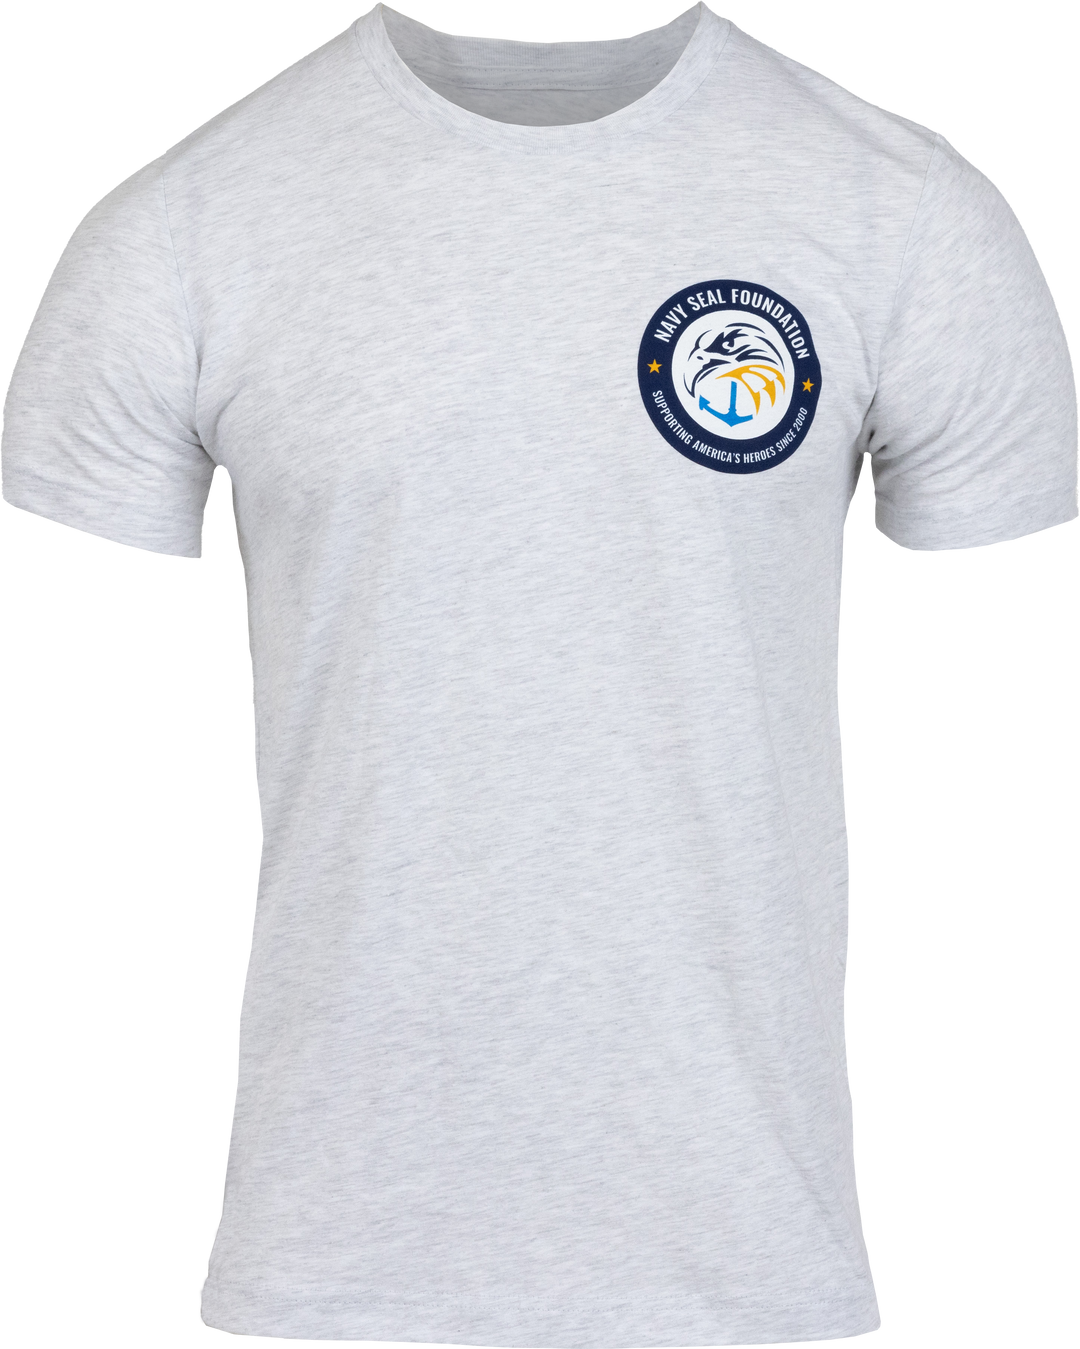 Ash tee with Navy SEAL foundation logo on left chest circled by text "NAVY SEAL FOUNDATION SUPPORTING AMERICA'S HEROES SINCE 2000"